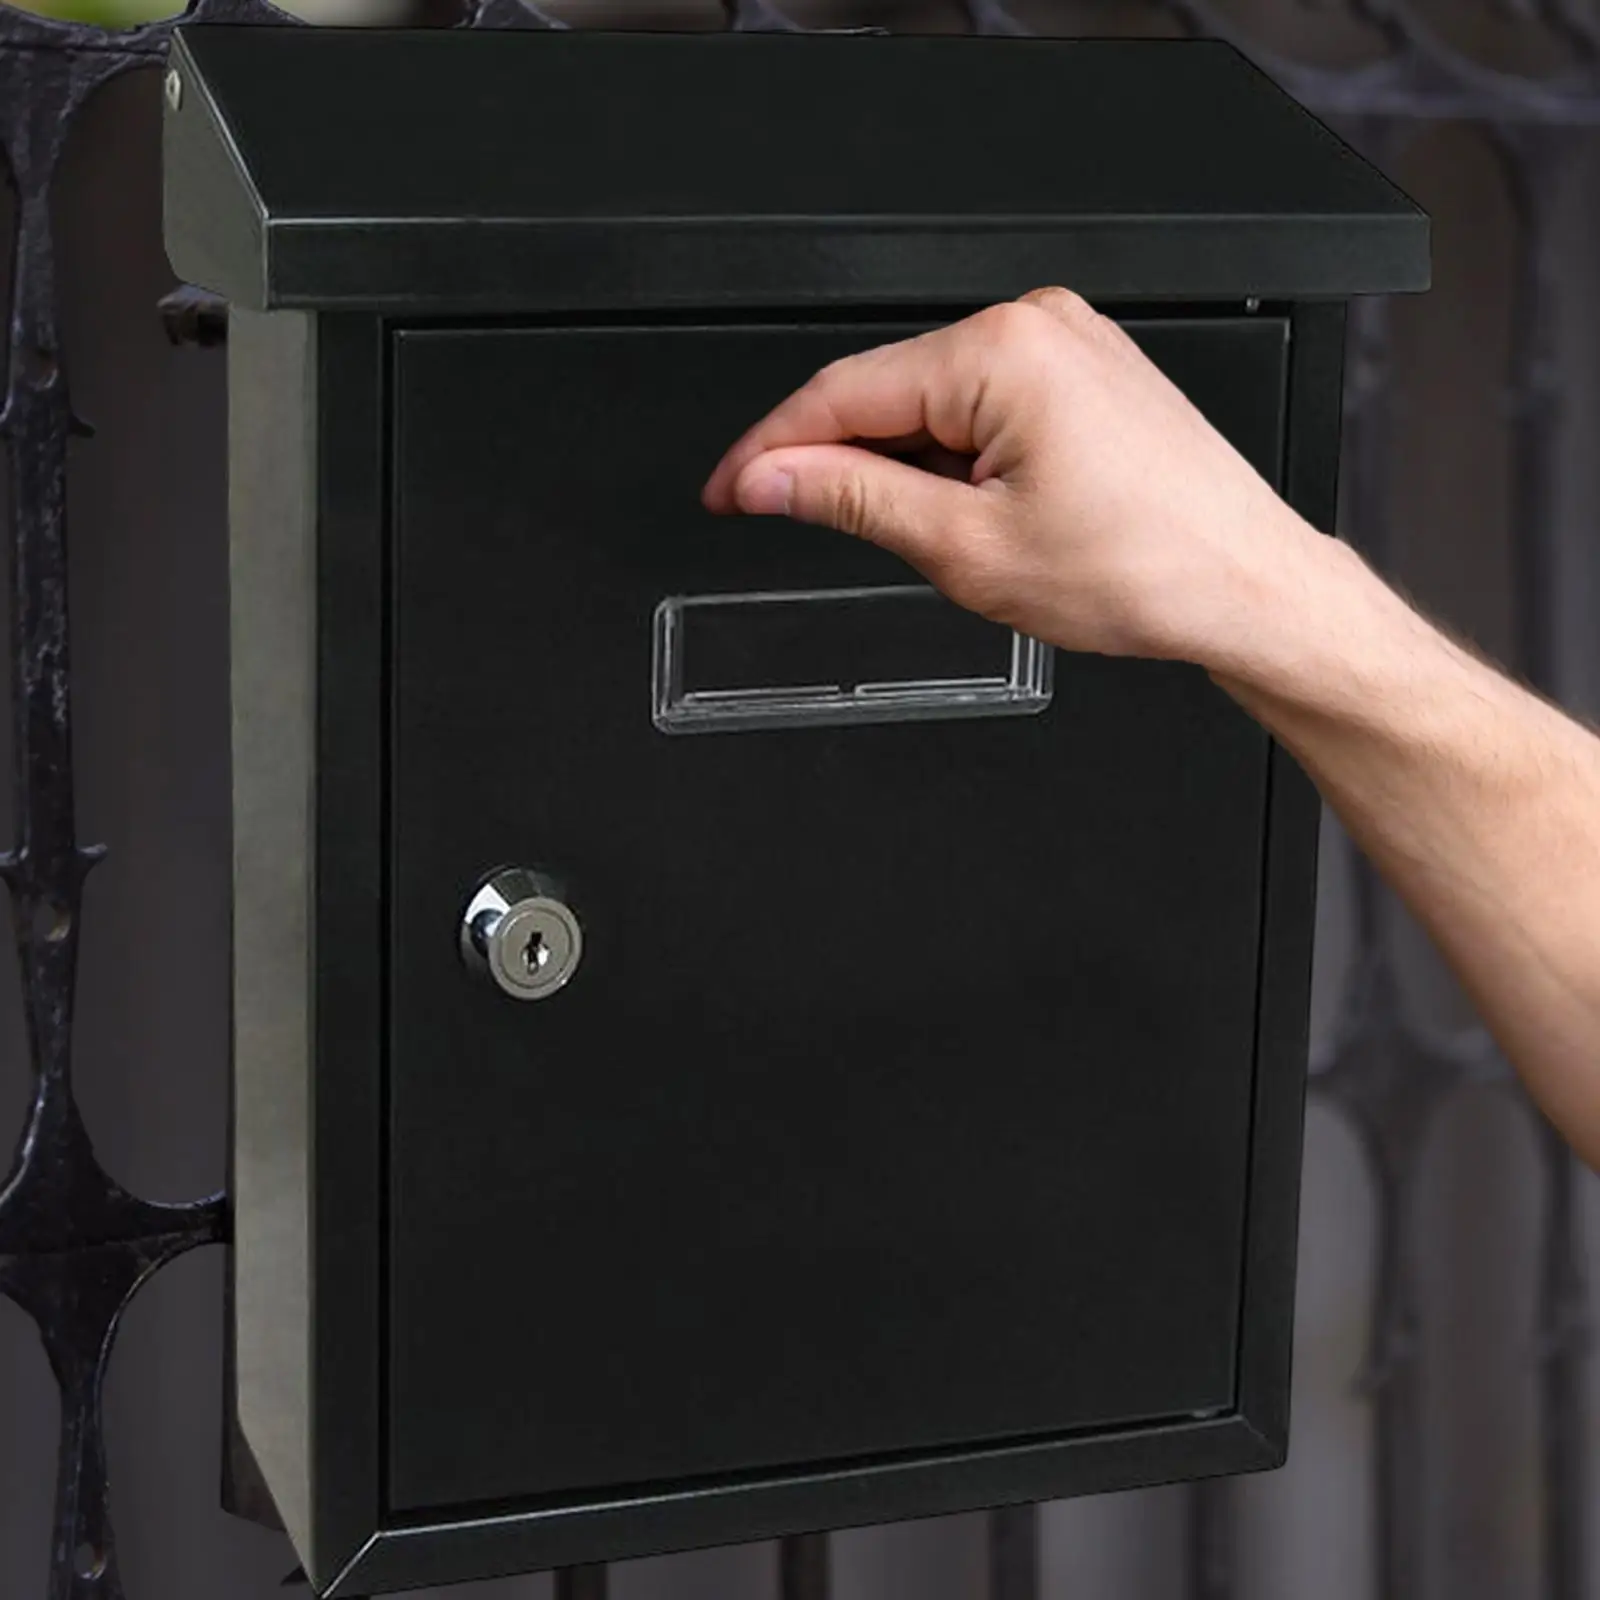 Outdoor Wall Mount Mailbox Decorative Metal Newspaper Letterbox Lockable Mail Box for Home Front Decor Business Office